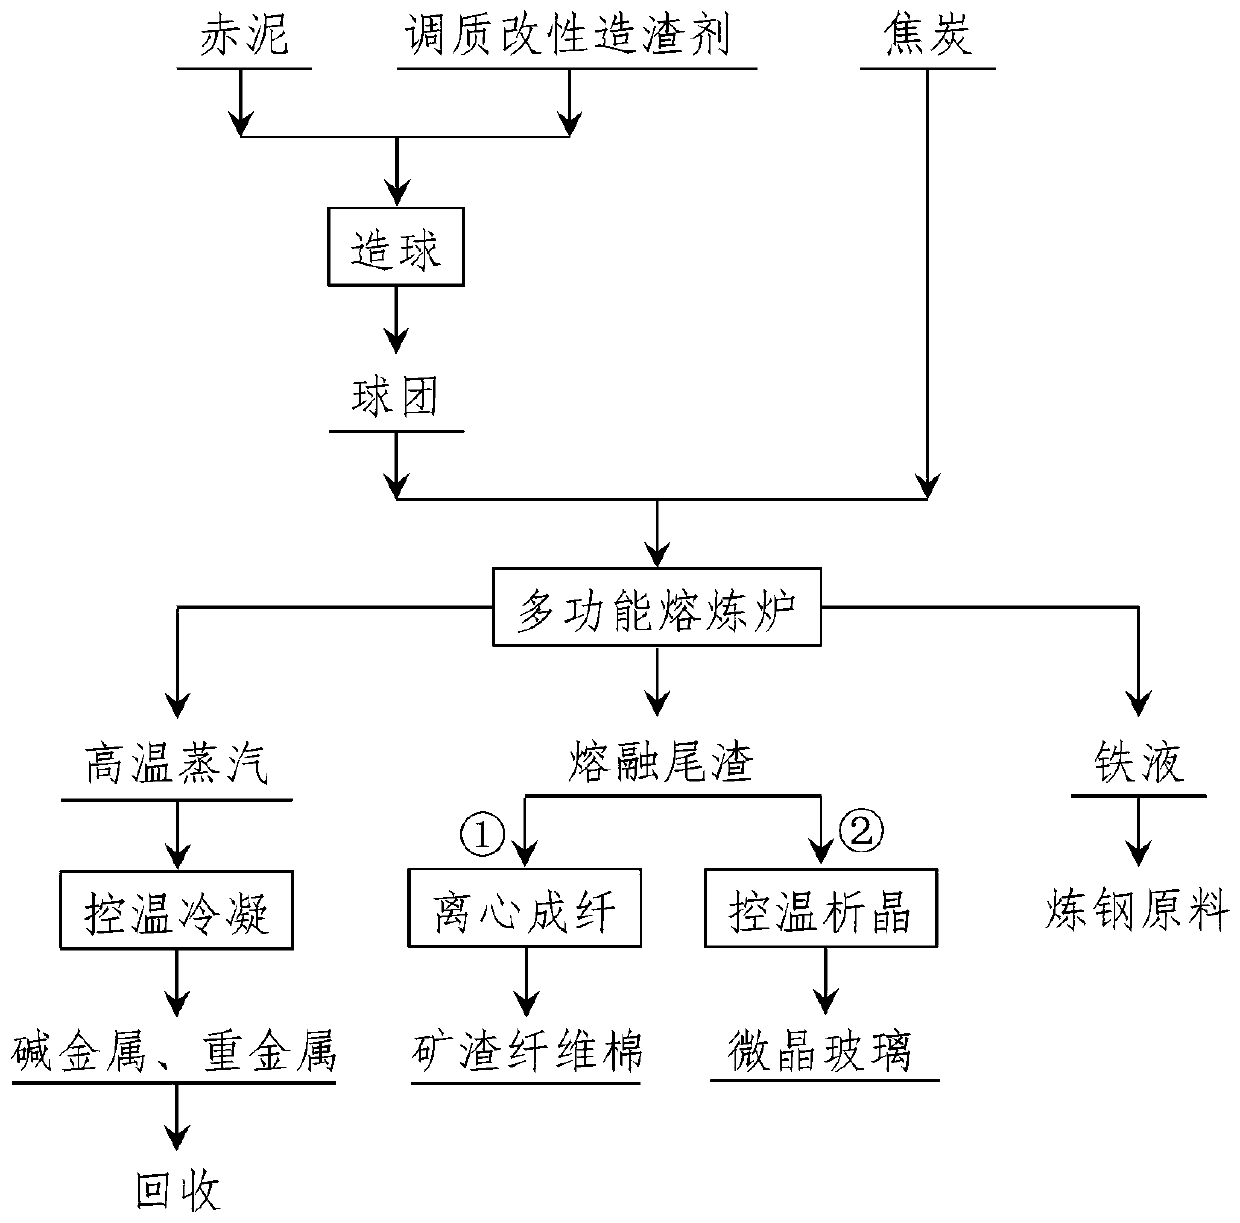 Process for red mud multi-component separation and tailings hardening and tempering utilization